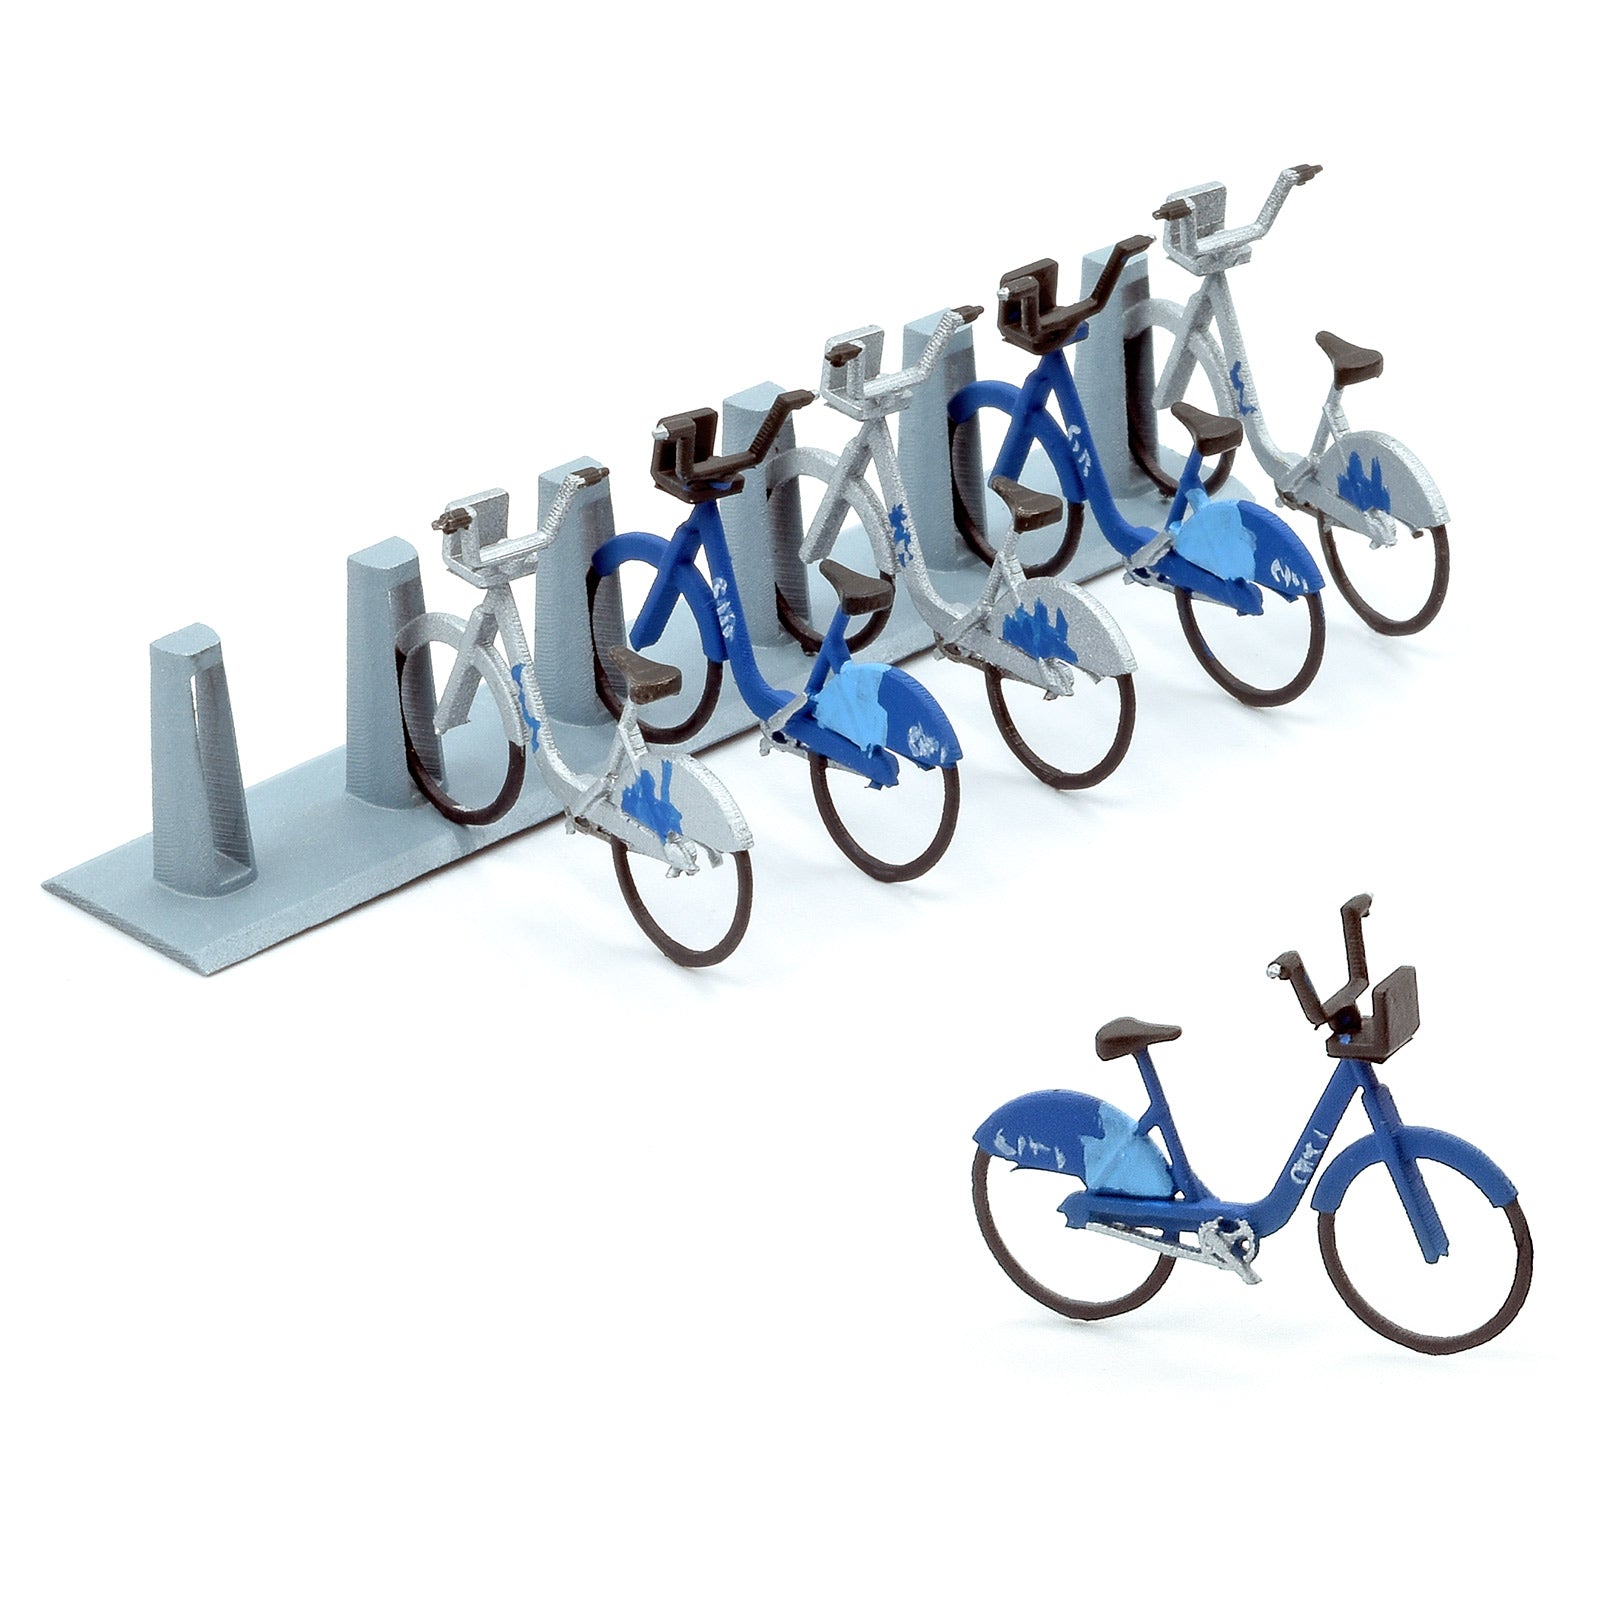 Metropolitan Bike Share Bicycles, HO Scale, by Scientific